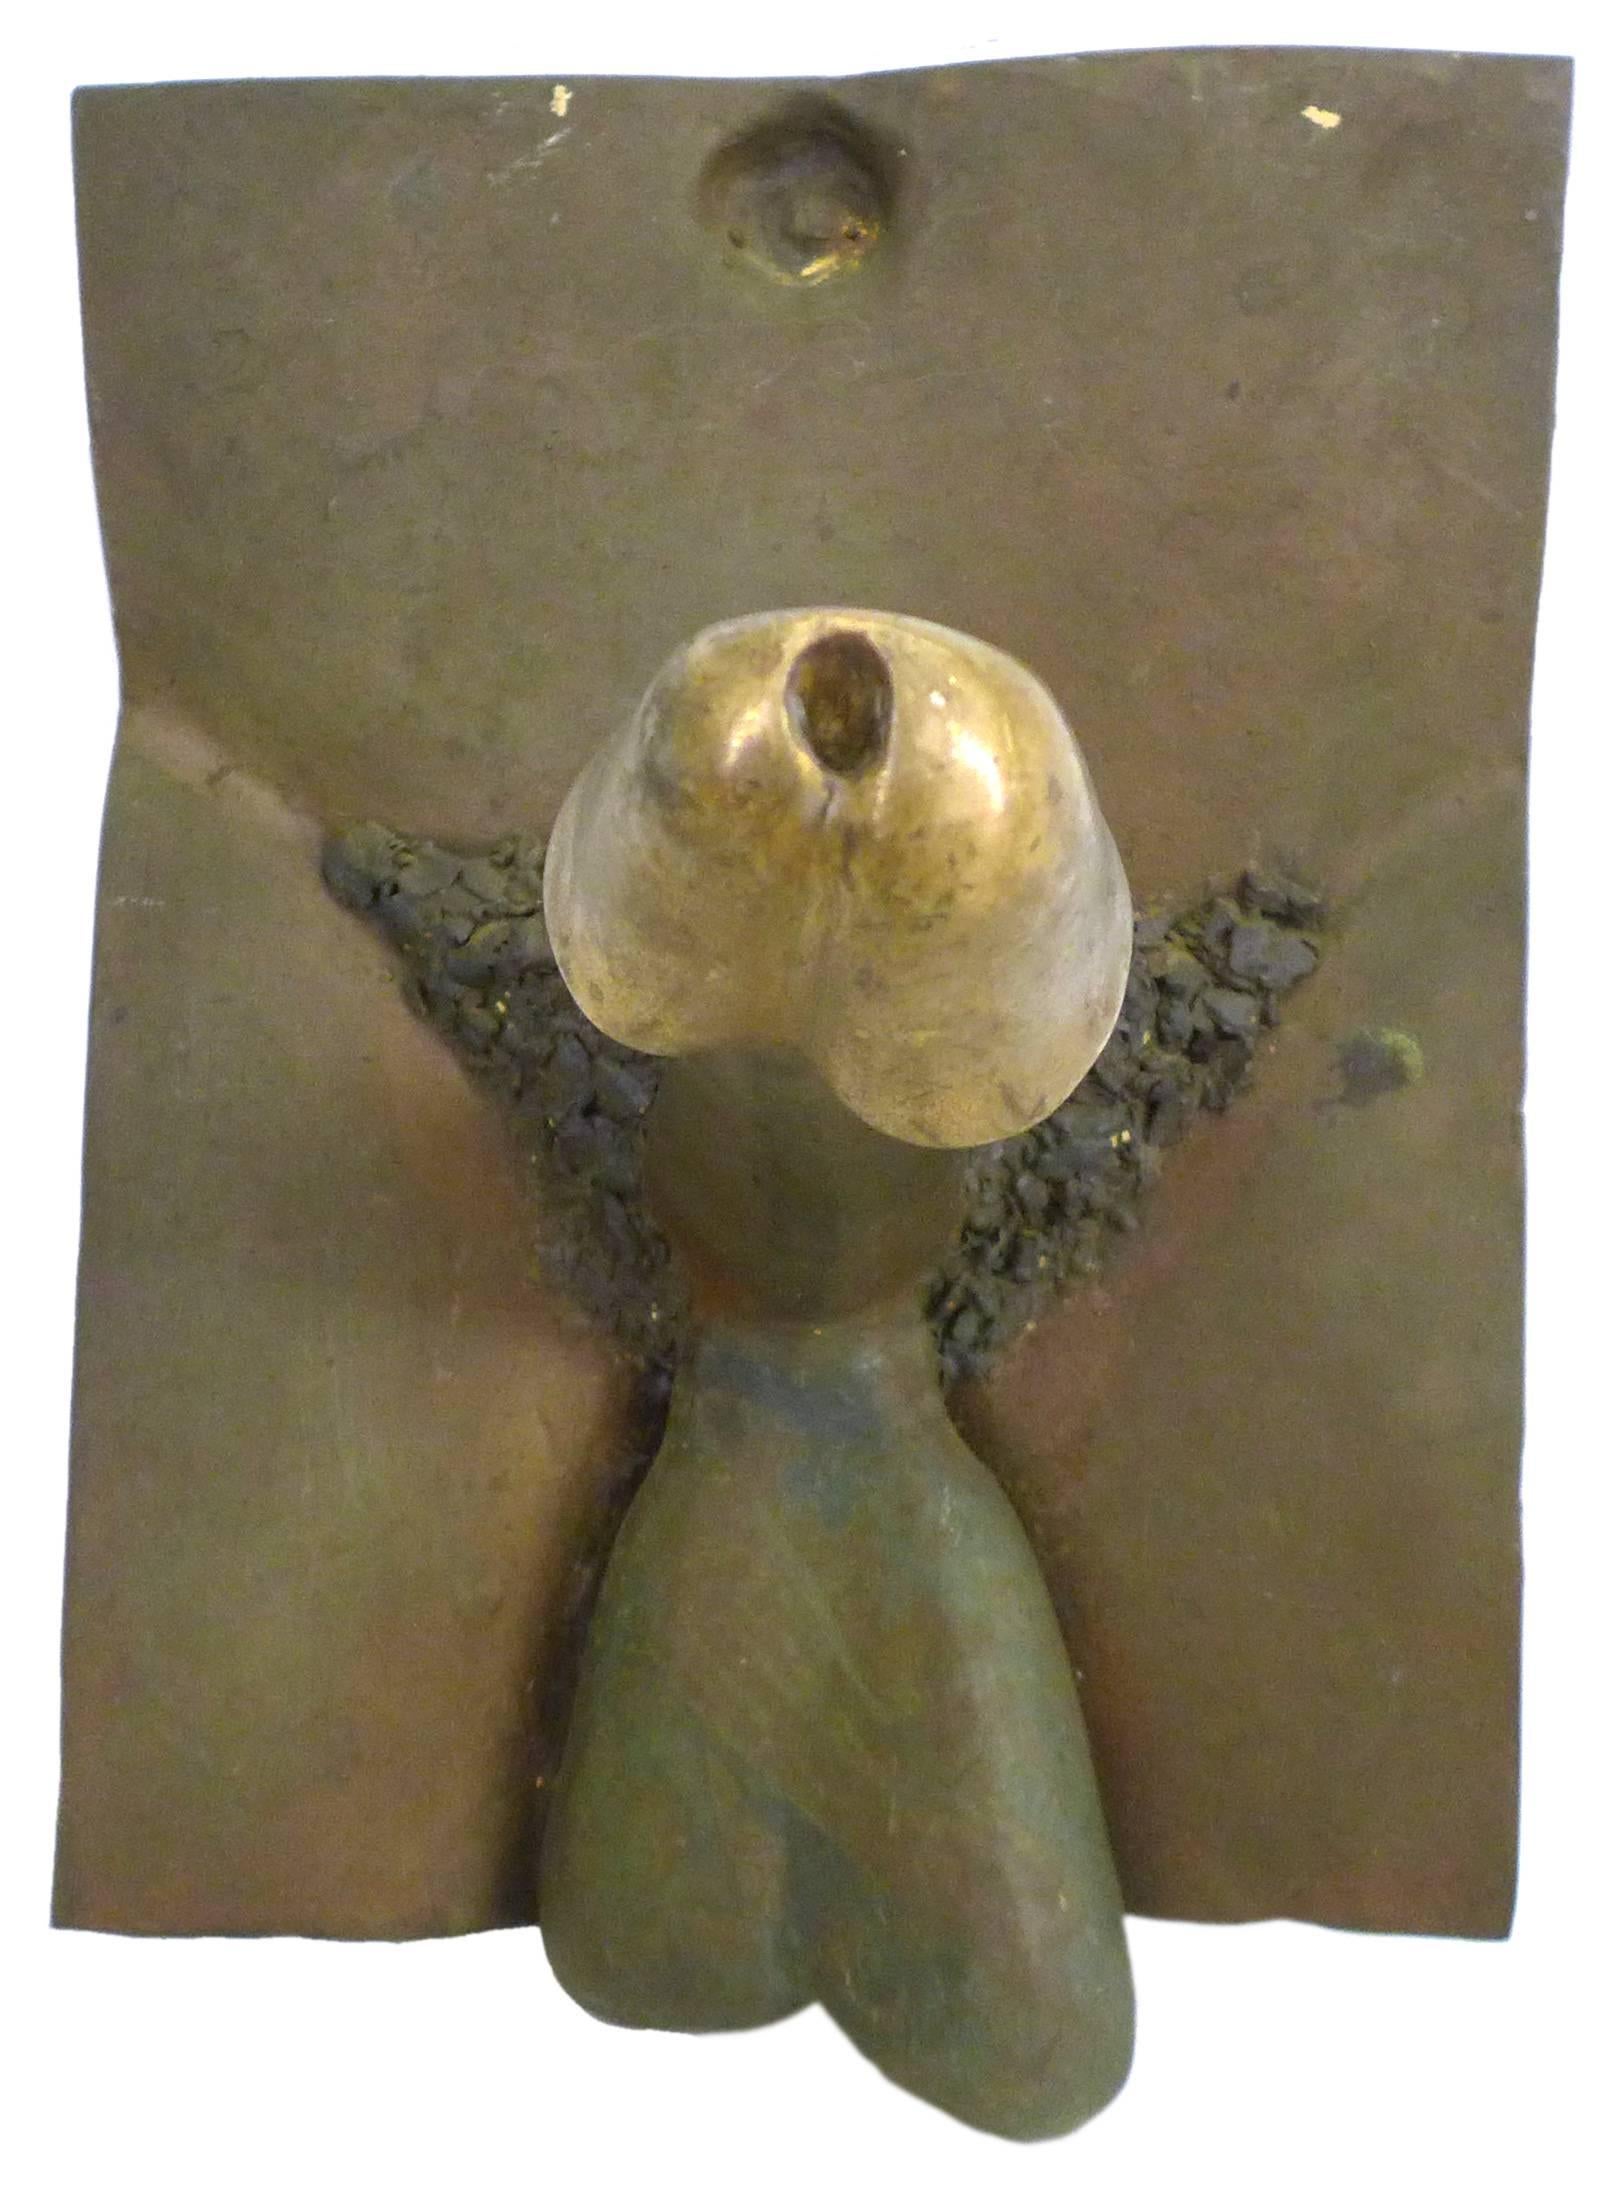 An unforgettable, cast-bronze, male-genitalia wall-hanging sculpture. A heavy-cast, comically proportioned, straight-to-the-point, figurative piece of thorough yet crude detail; starting north at the navel and heading on south as necessary. Wearing